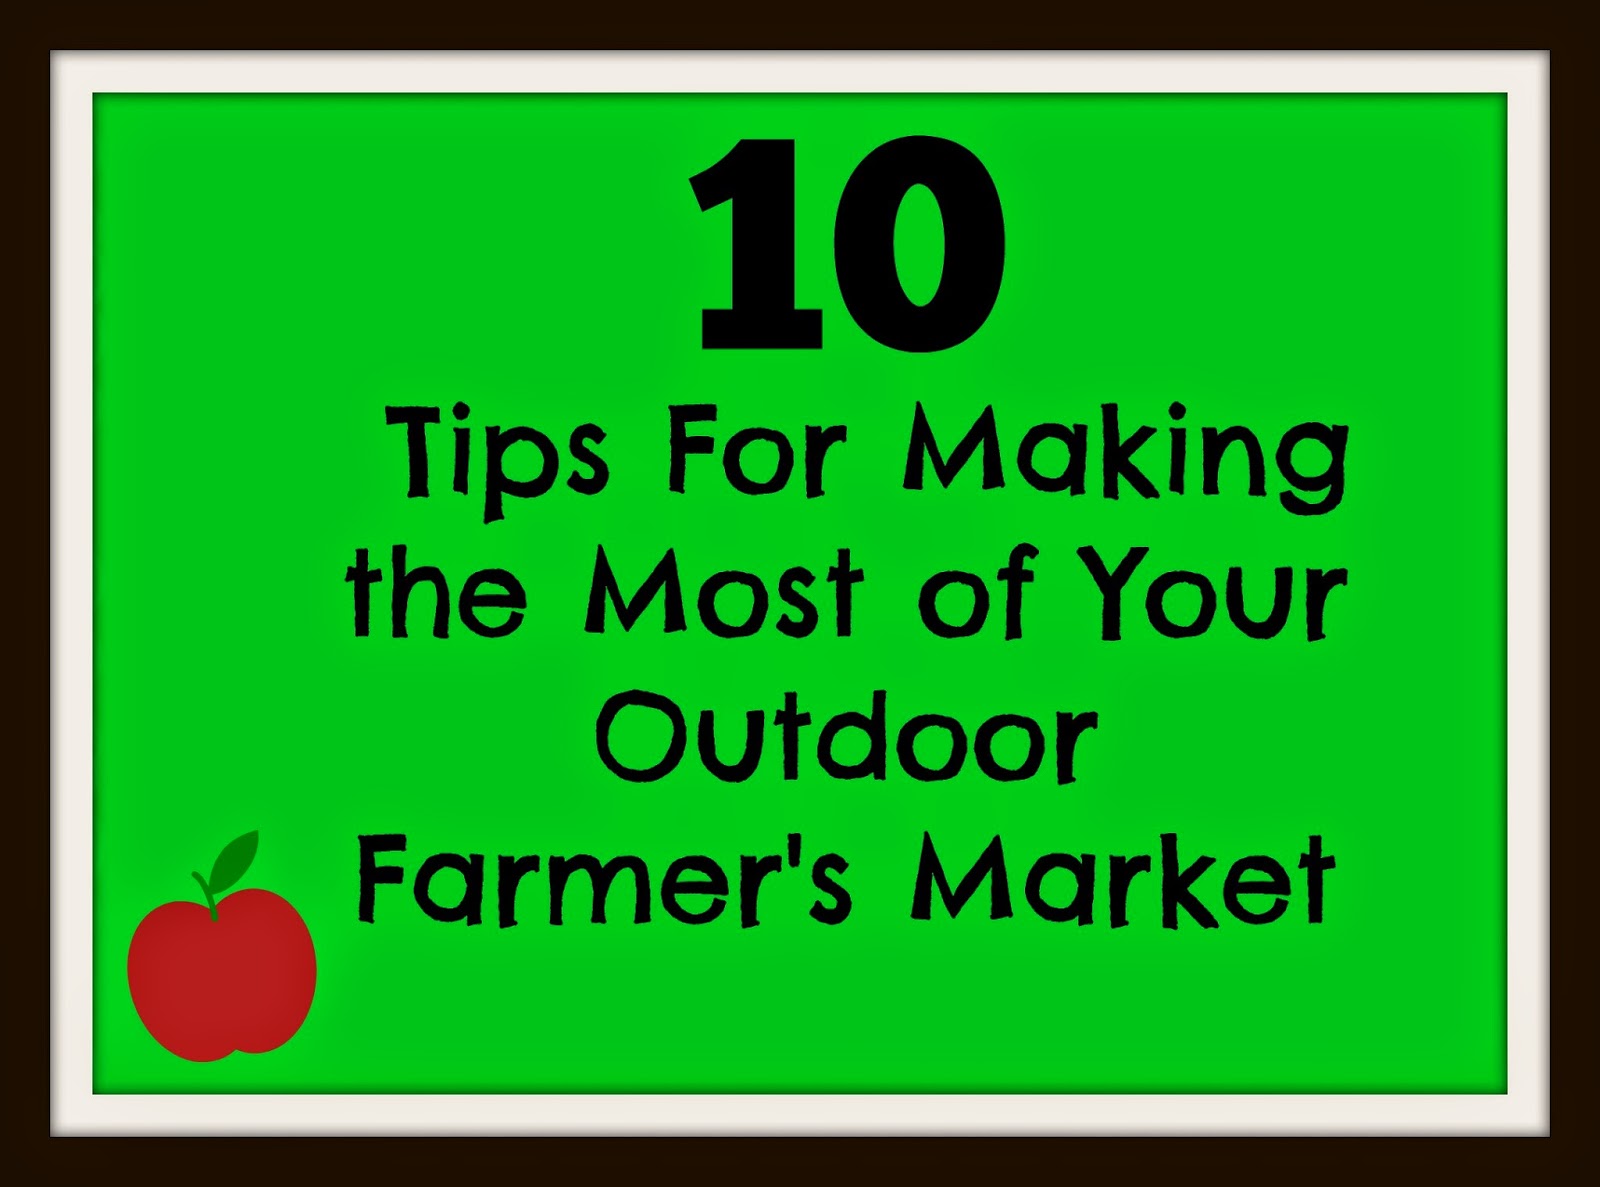 10 Tips For Making the Most of Your Farmer’s Market